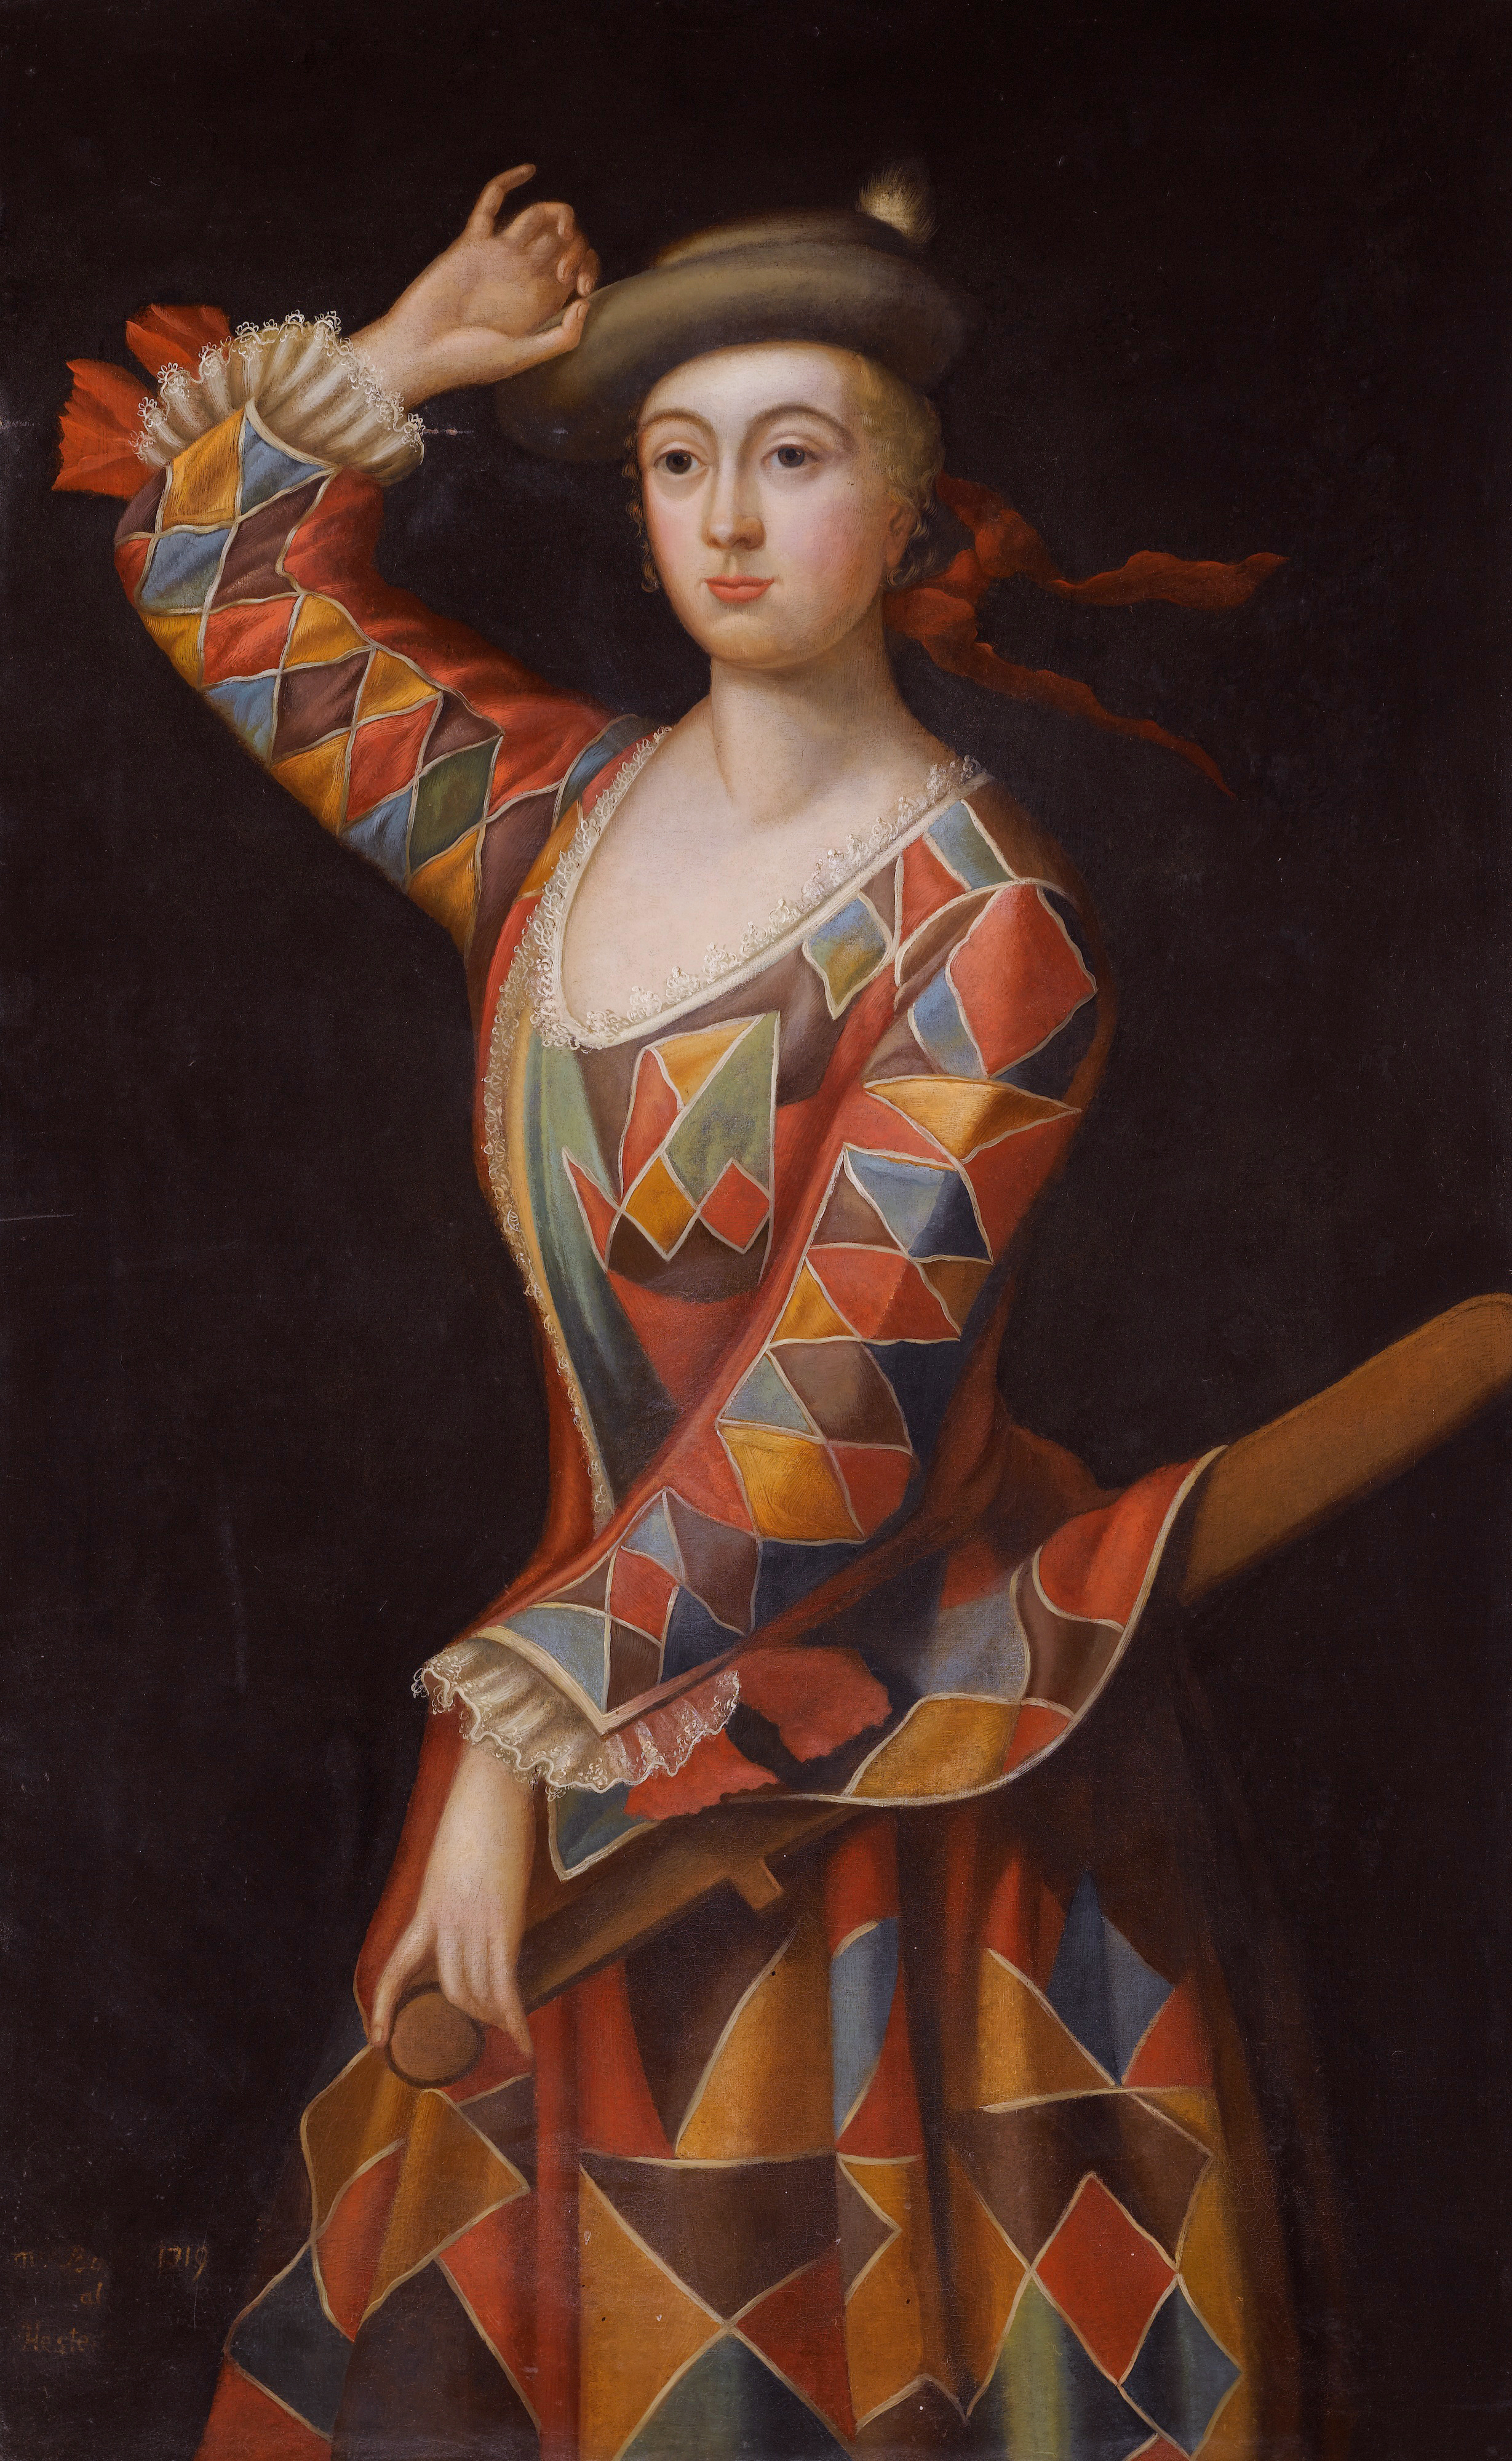 The woman wears a typical fancy dress of the 18th century, except for the fact that it has a funky Harlequin print.